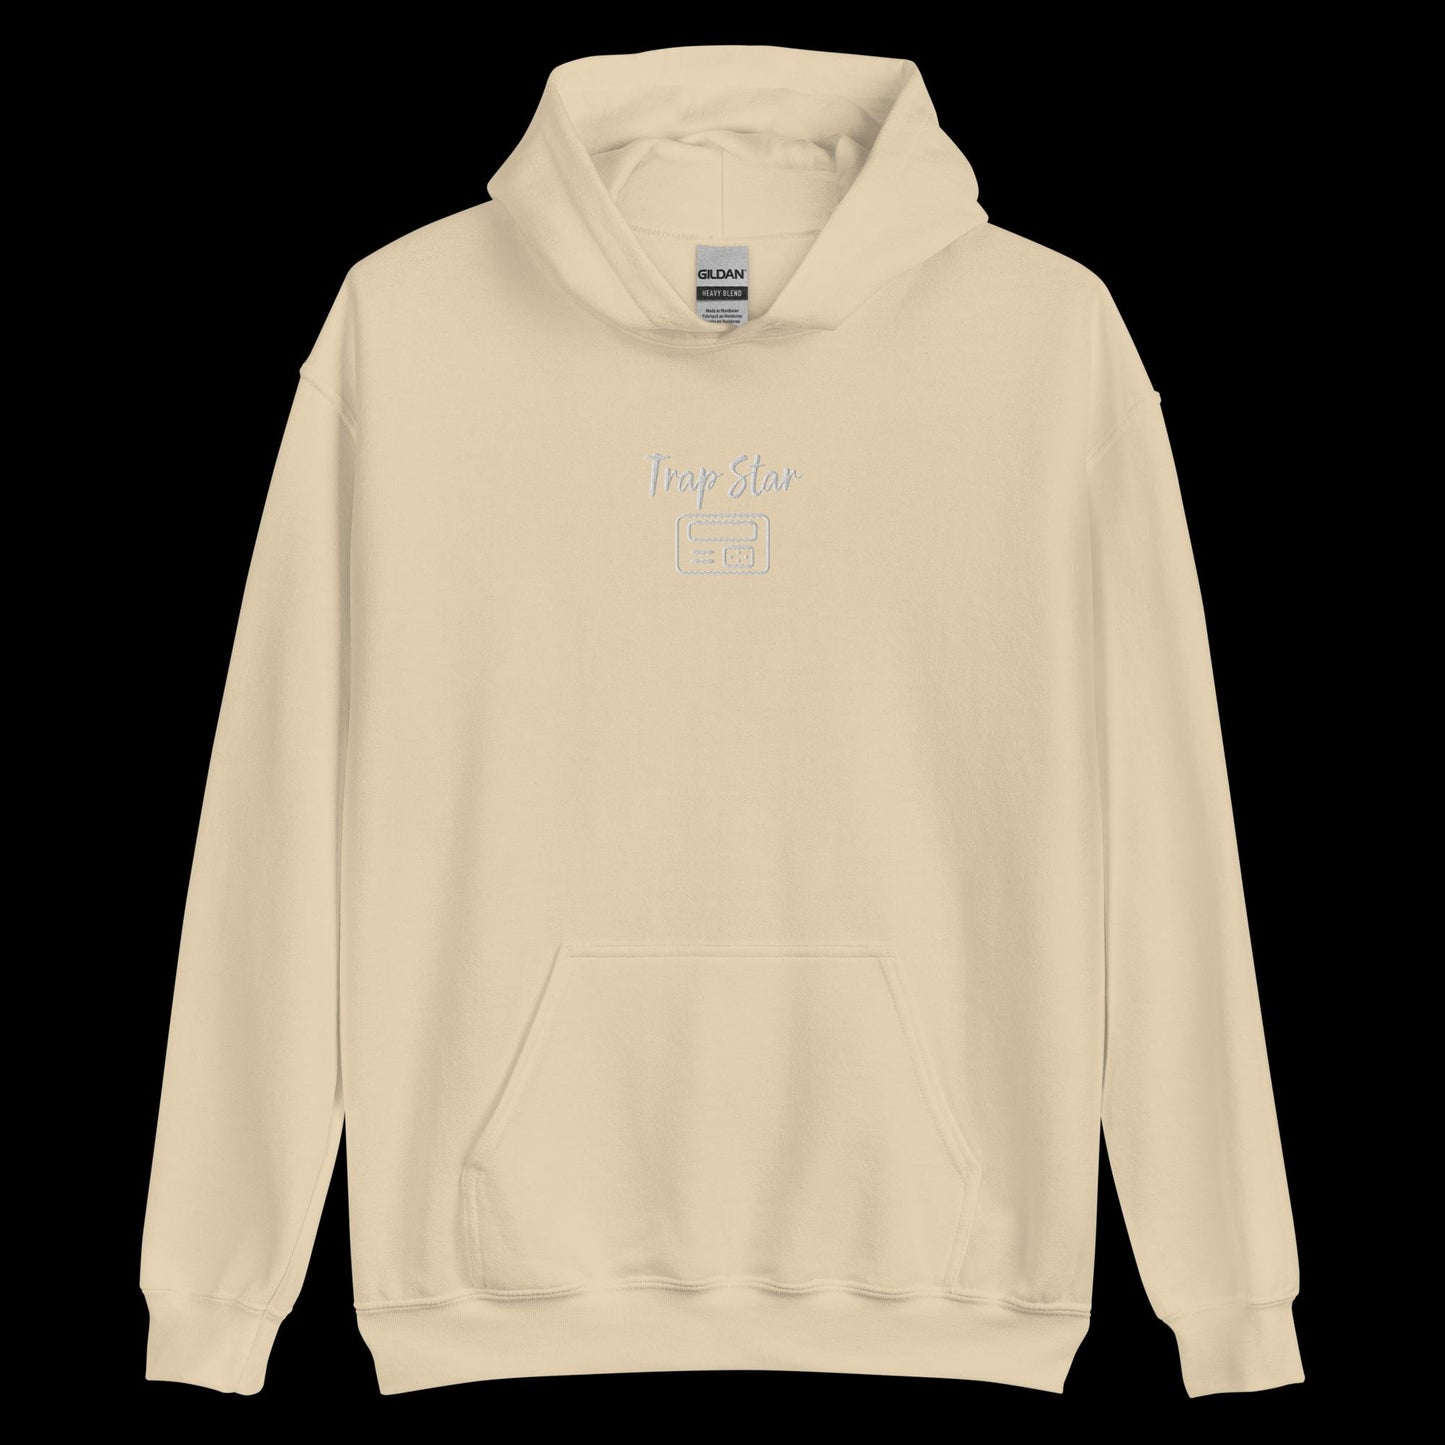 Trap Star (with Beeper logo) Unisex Hoodie